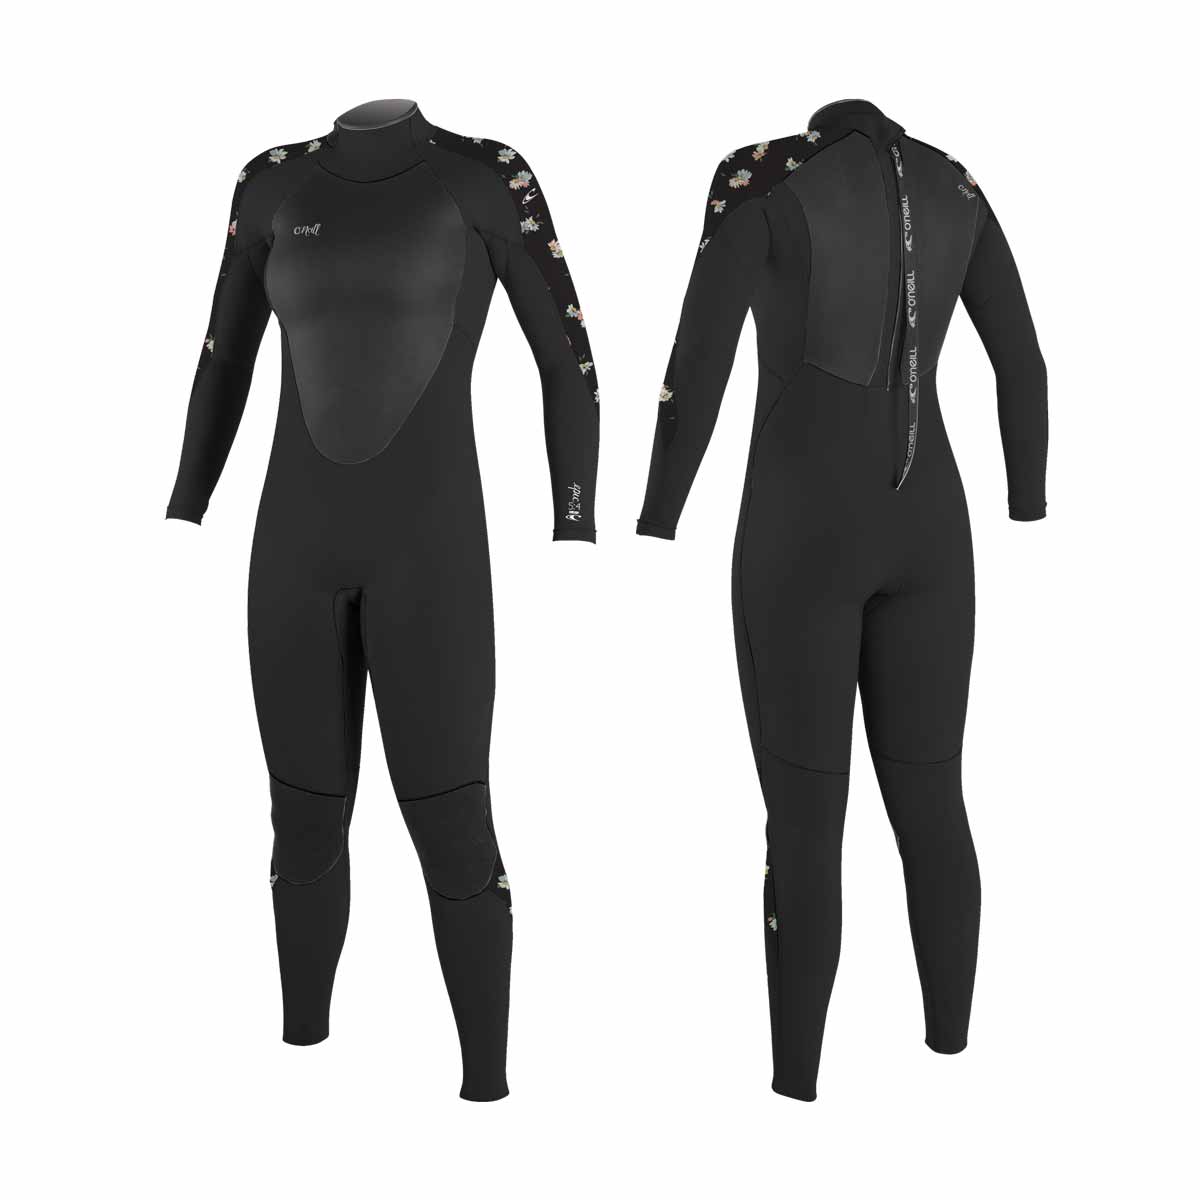 Wetsuit O'Neill WMS Epic full 5/4 mm – Black/Cindy Daisy HT7